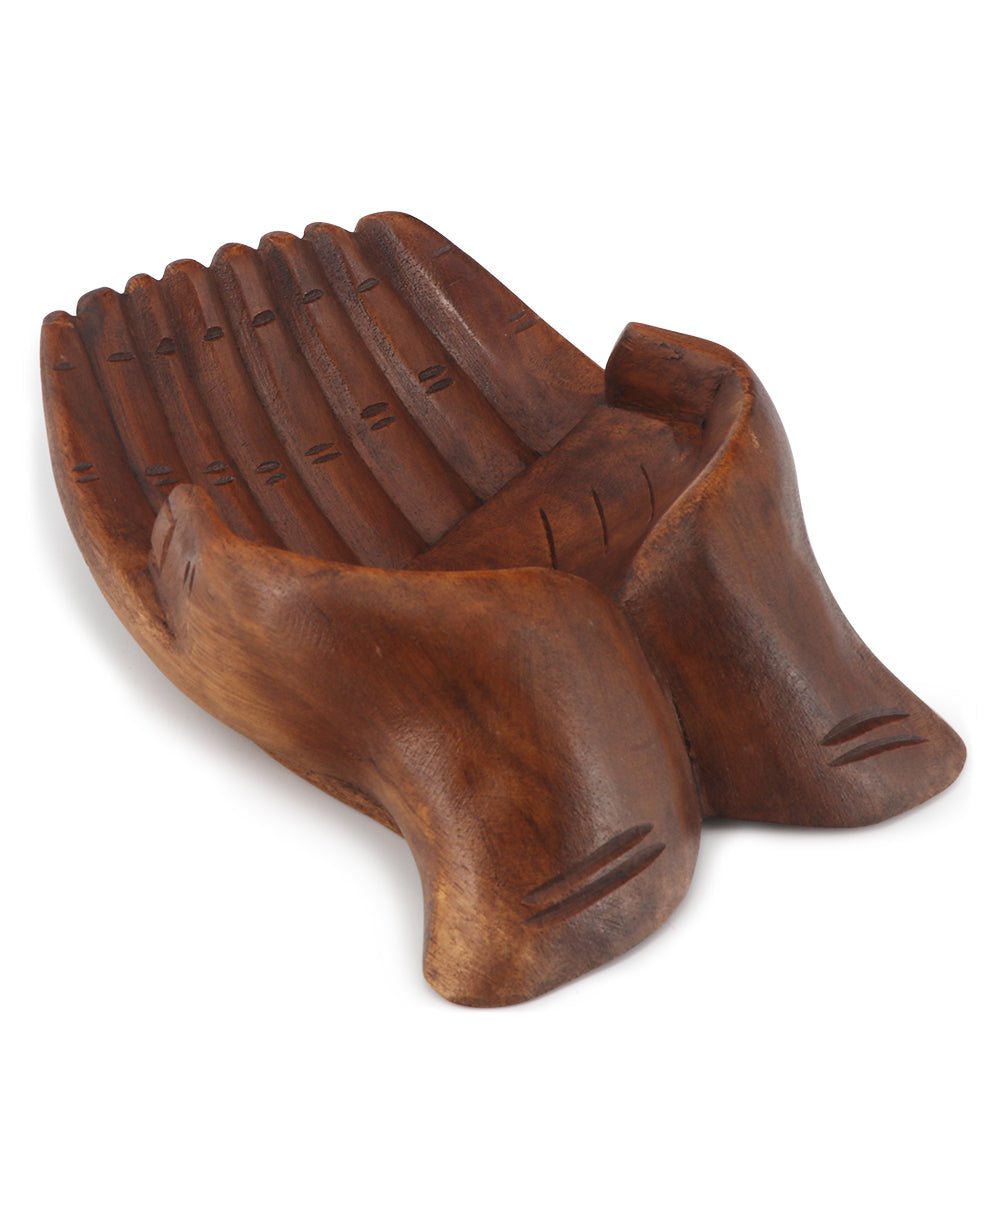 Giving Hands Wooden Statue and Display Bowl – Buddha Groove